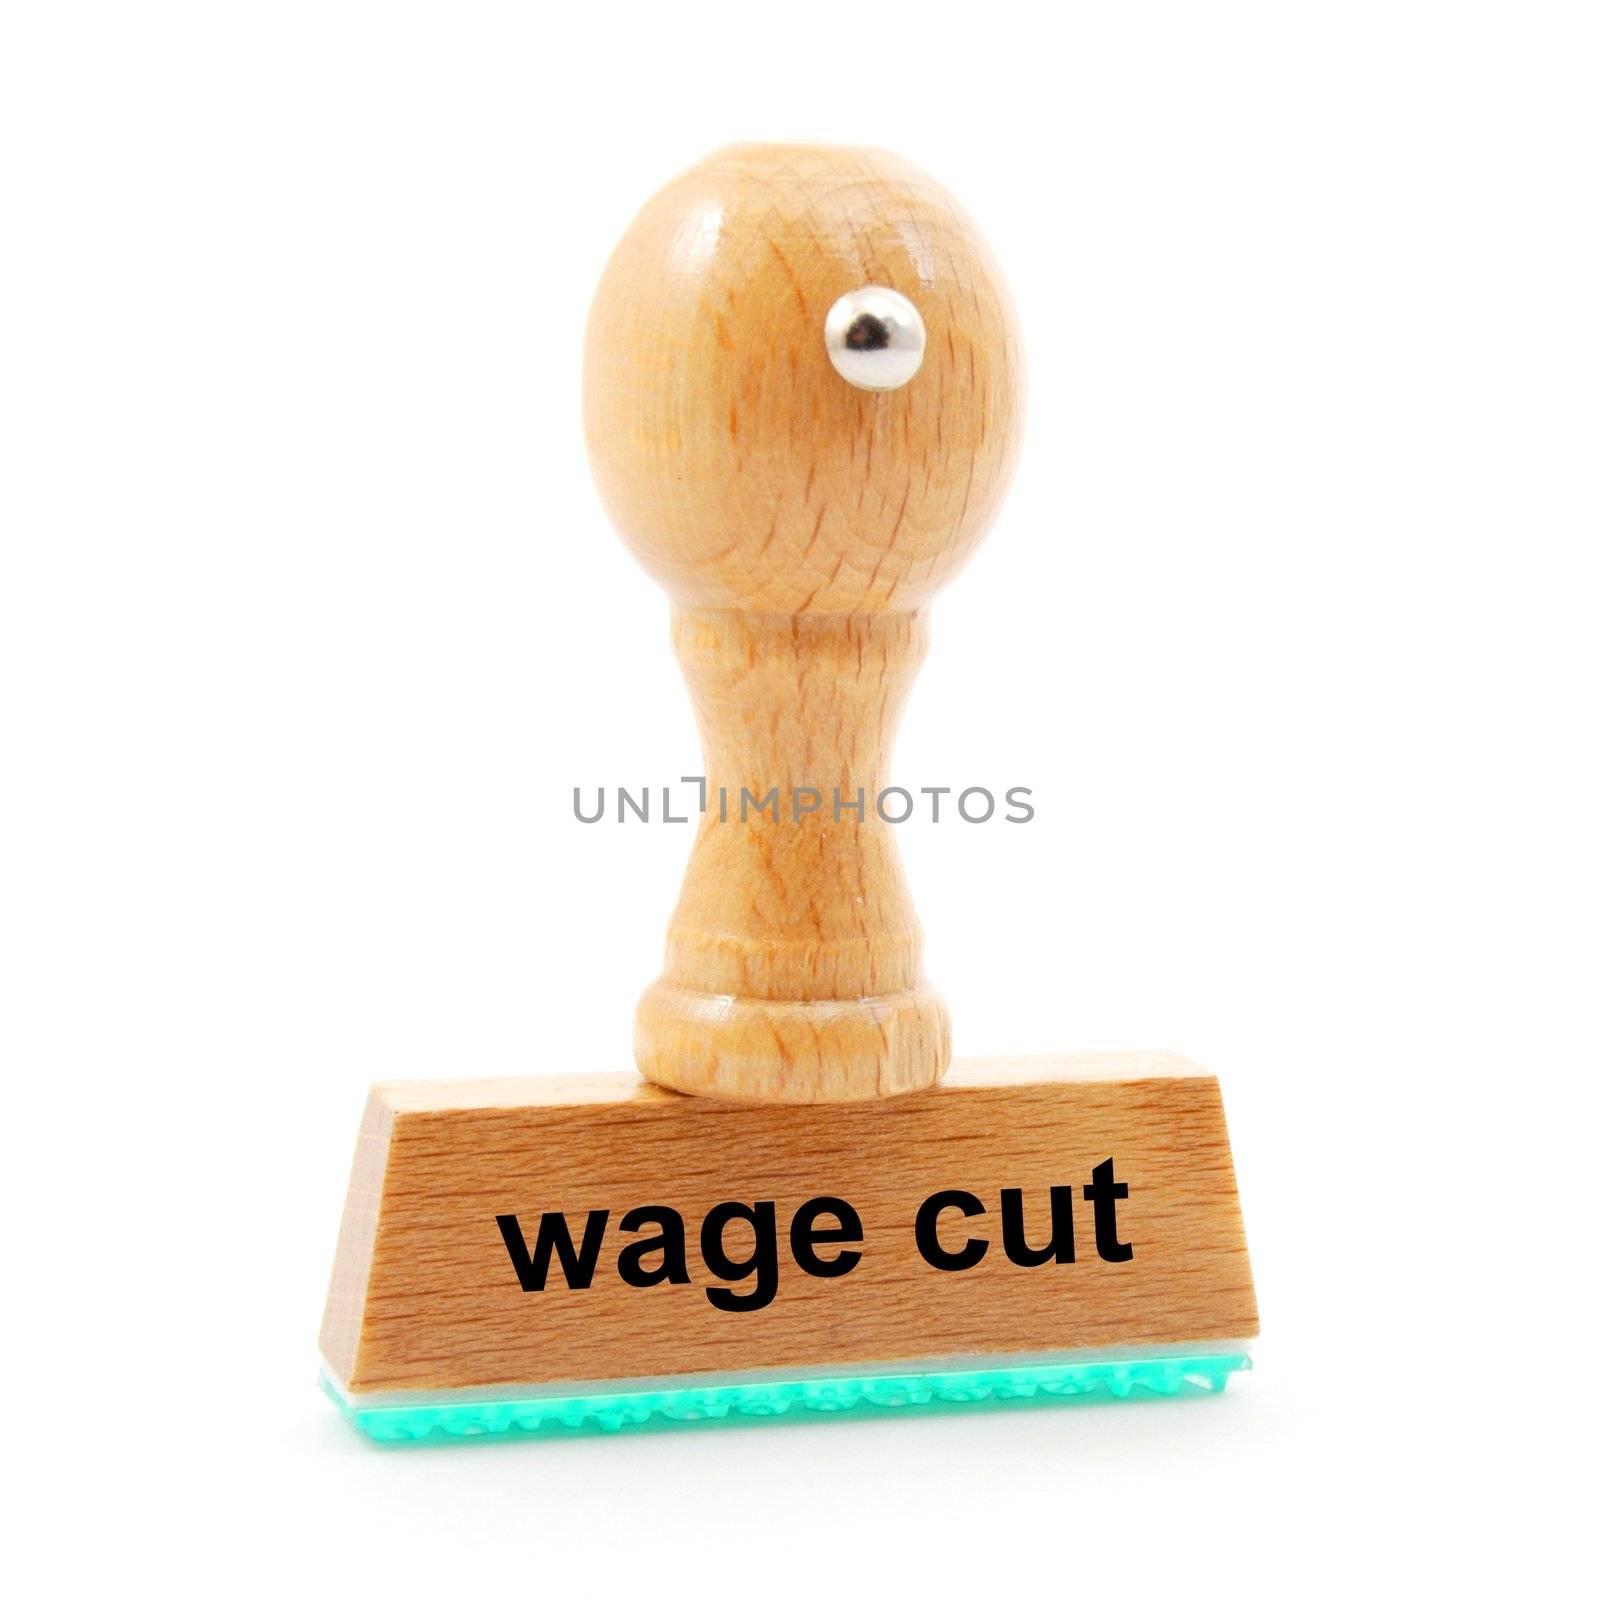 wage cut concept with stamp in office or bureau showing financial crisis